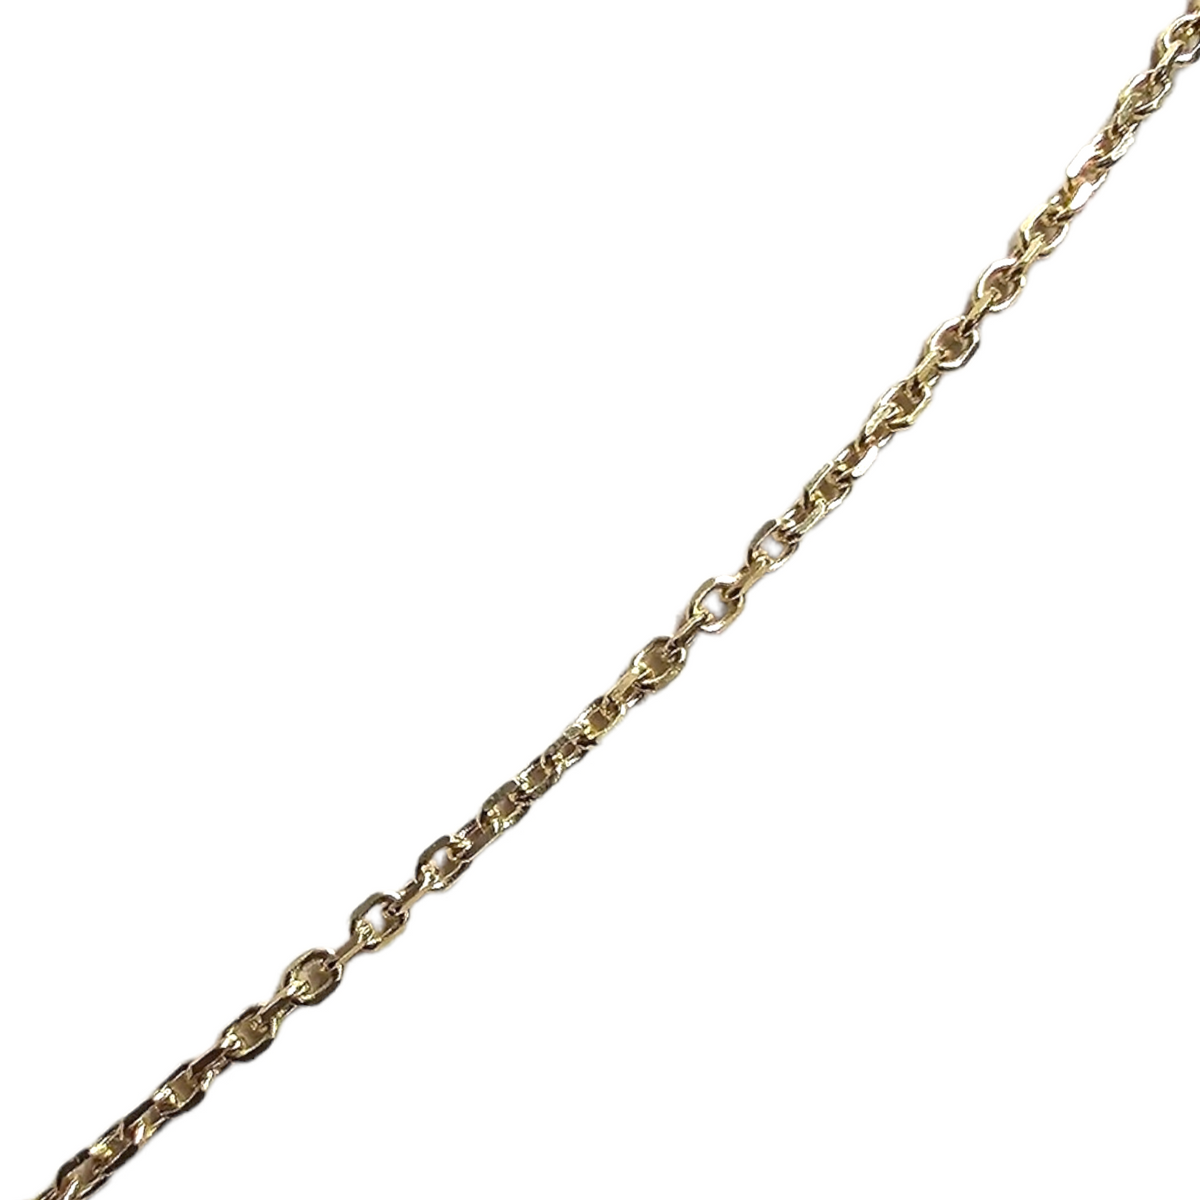 18Kt Yellow Gold Oval Diamond Pendant Necklace